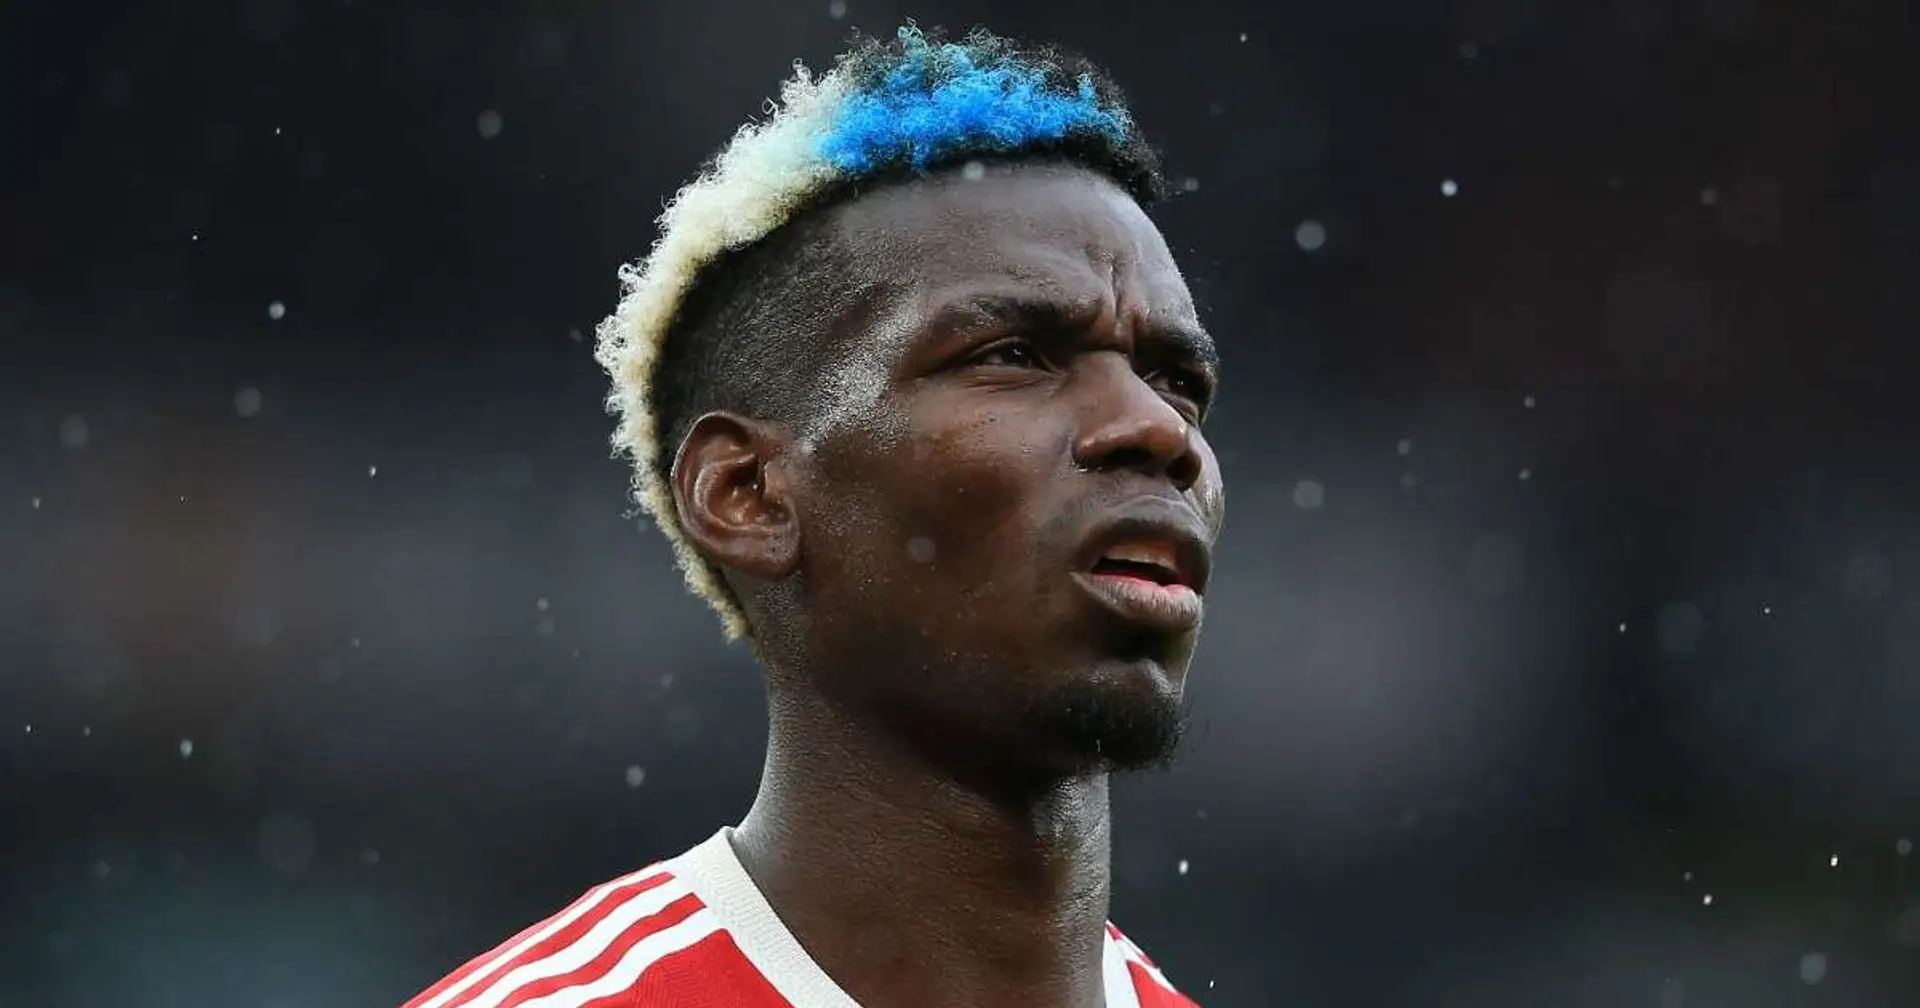 Man United confident of keeping Pogba amid PSG interest (reliability: 5 stars)